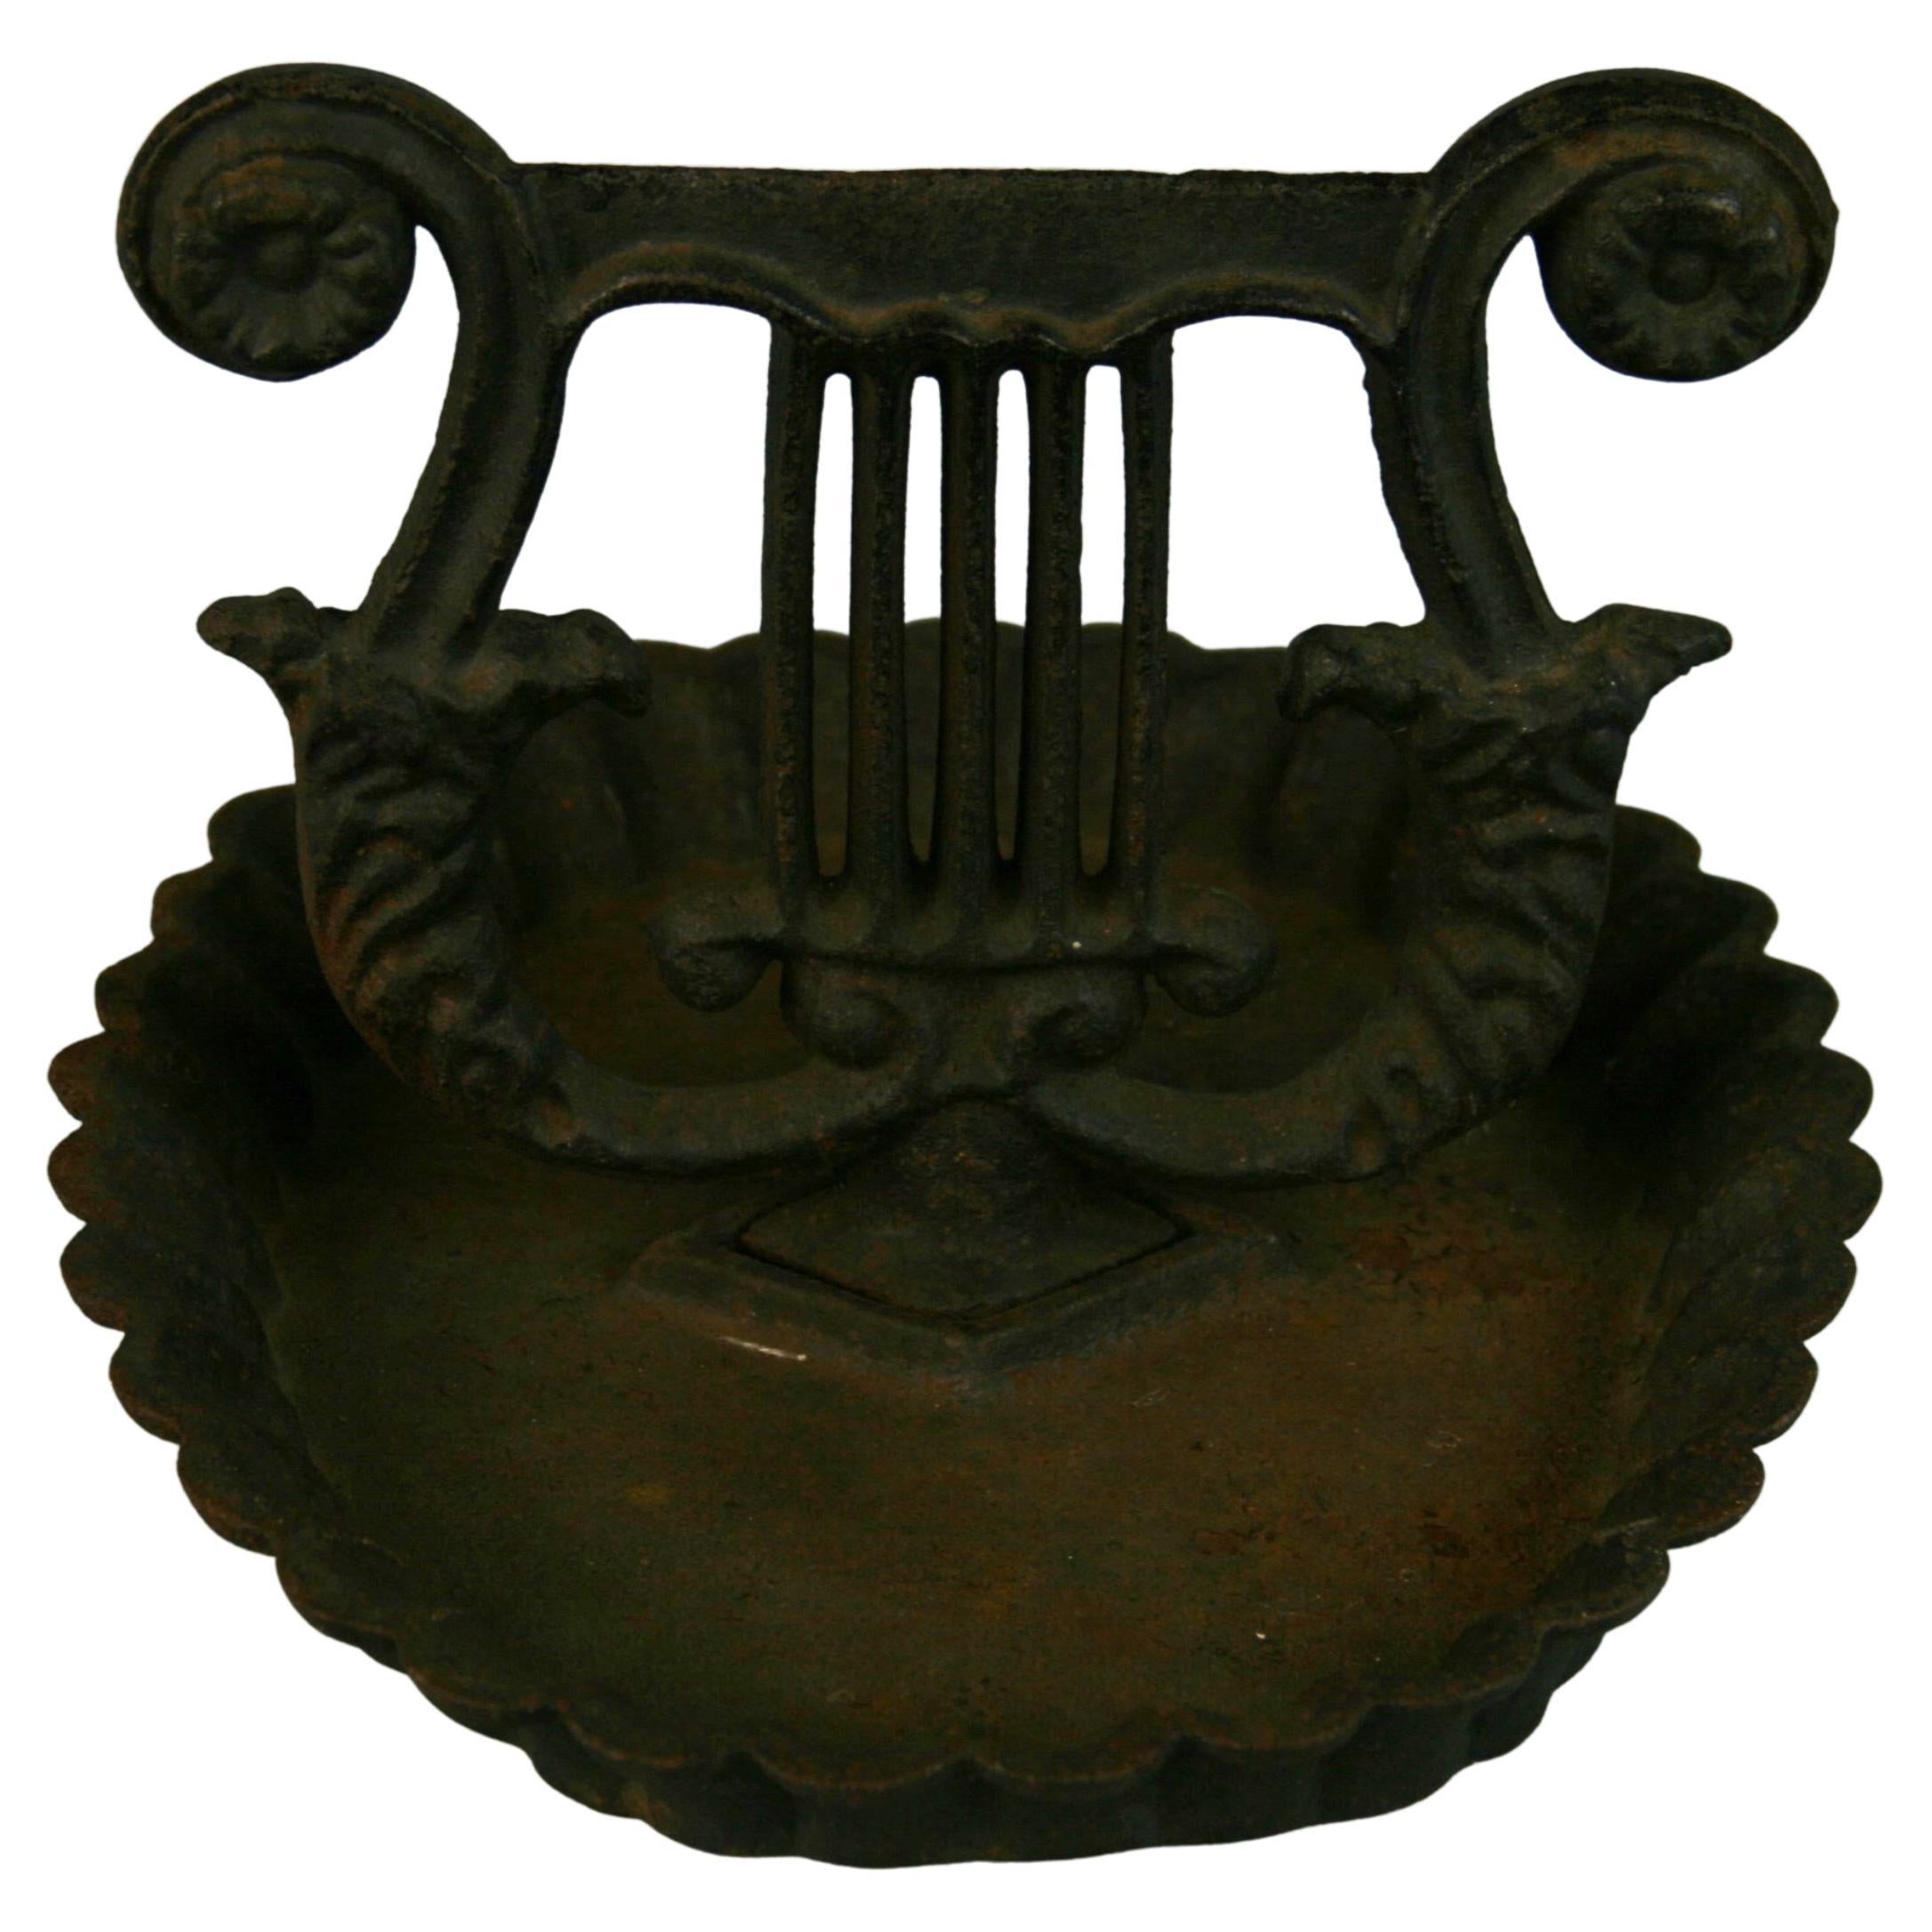 3-791 English cast iron boot scraper with harp detailing.